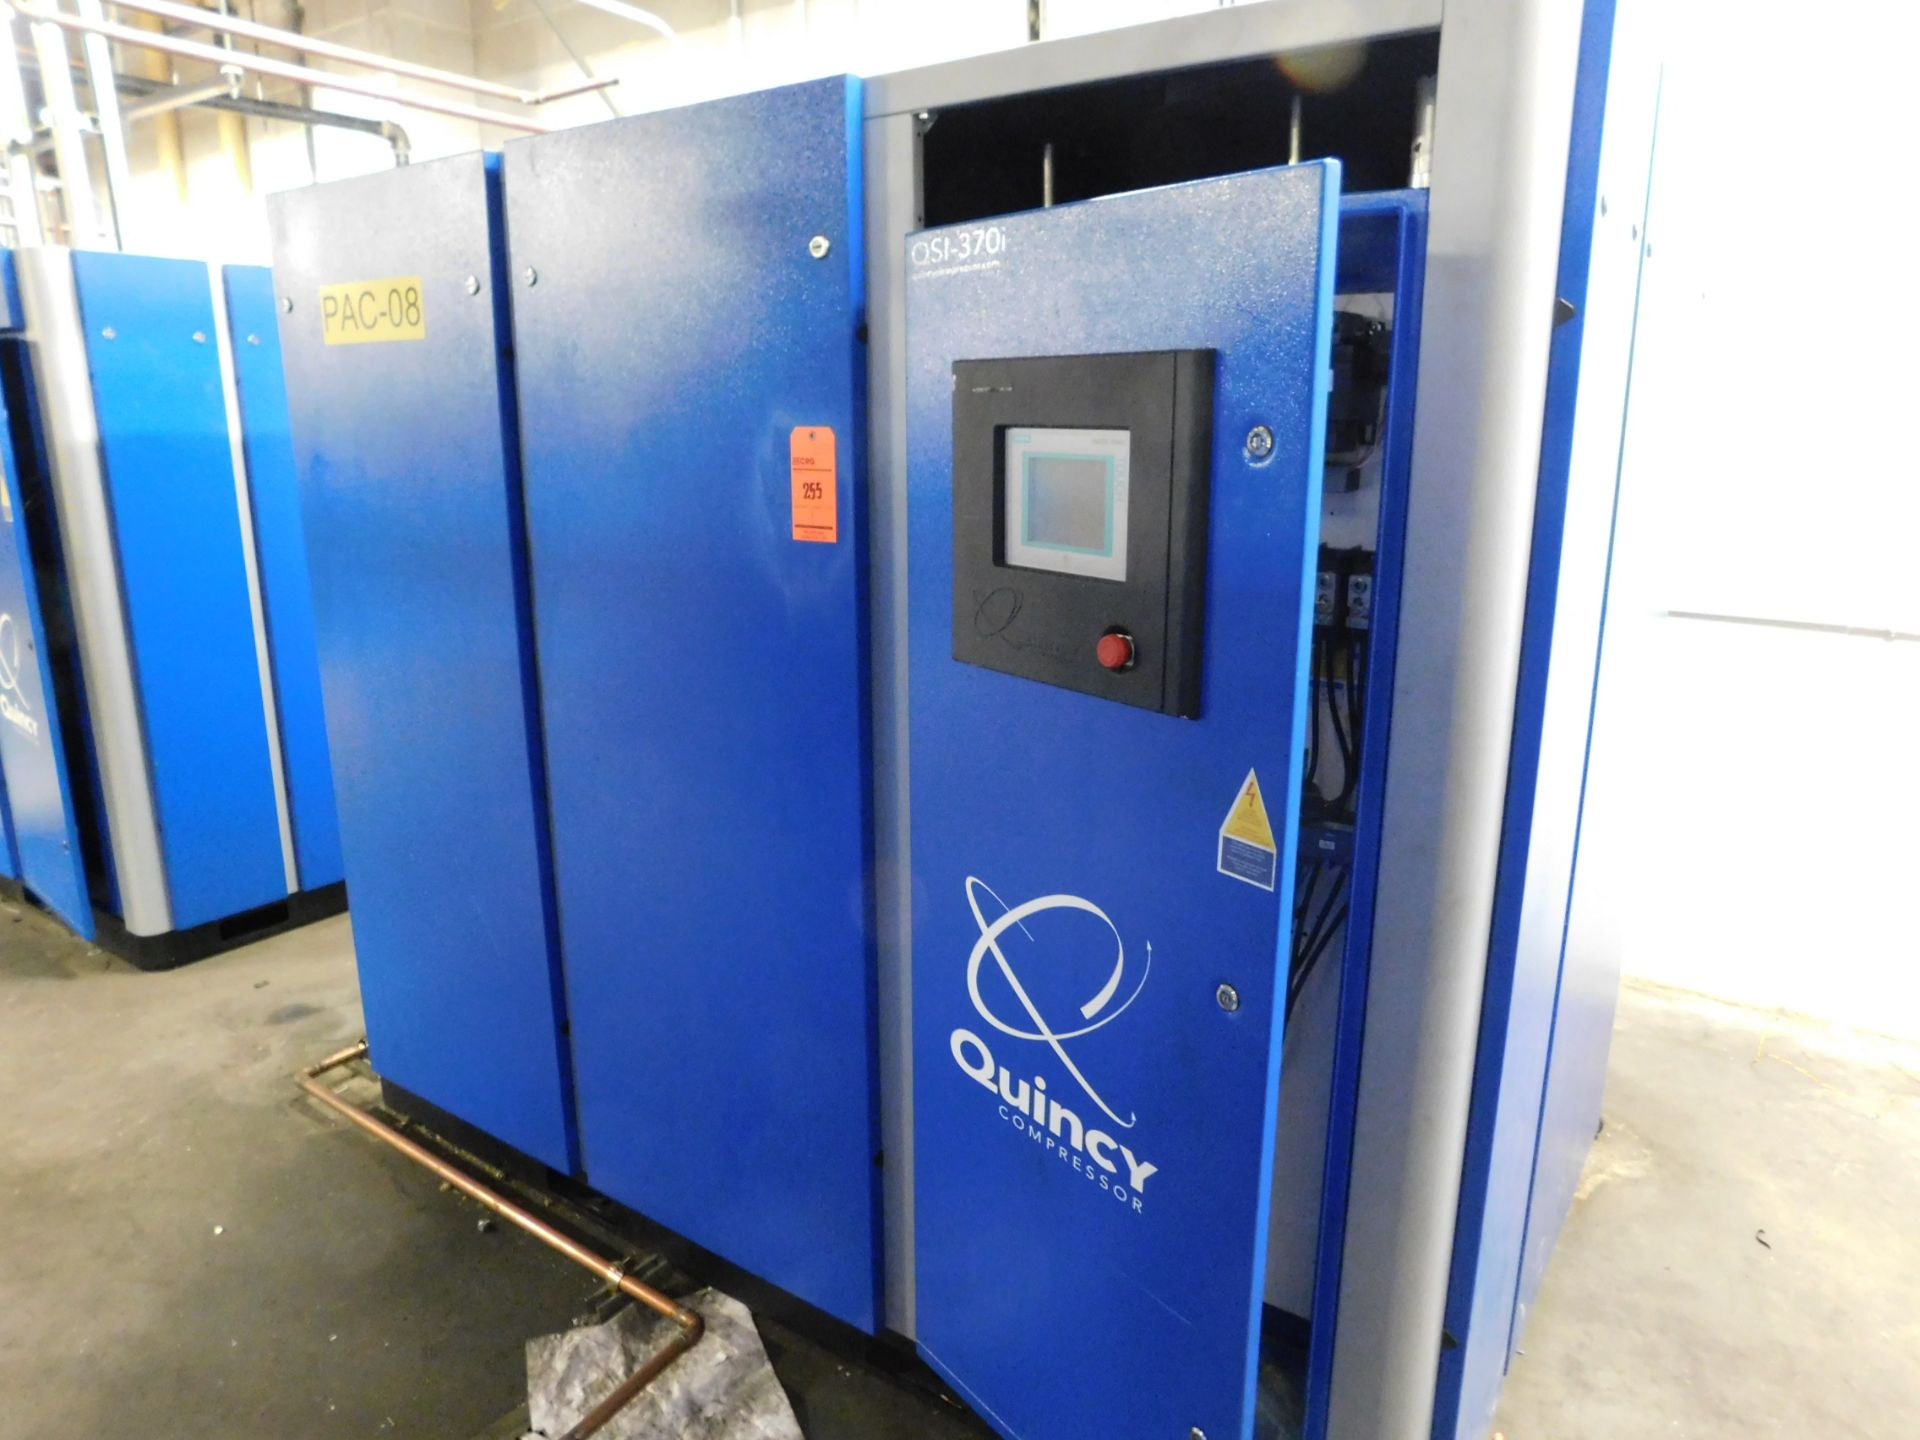 Quincy air compressor, (new, never installed) 75 HP motor, touchscreen, asset # PAC-07 m/n Qsi-